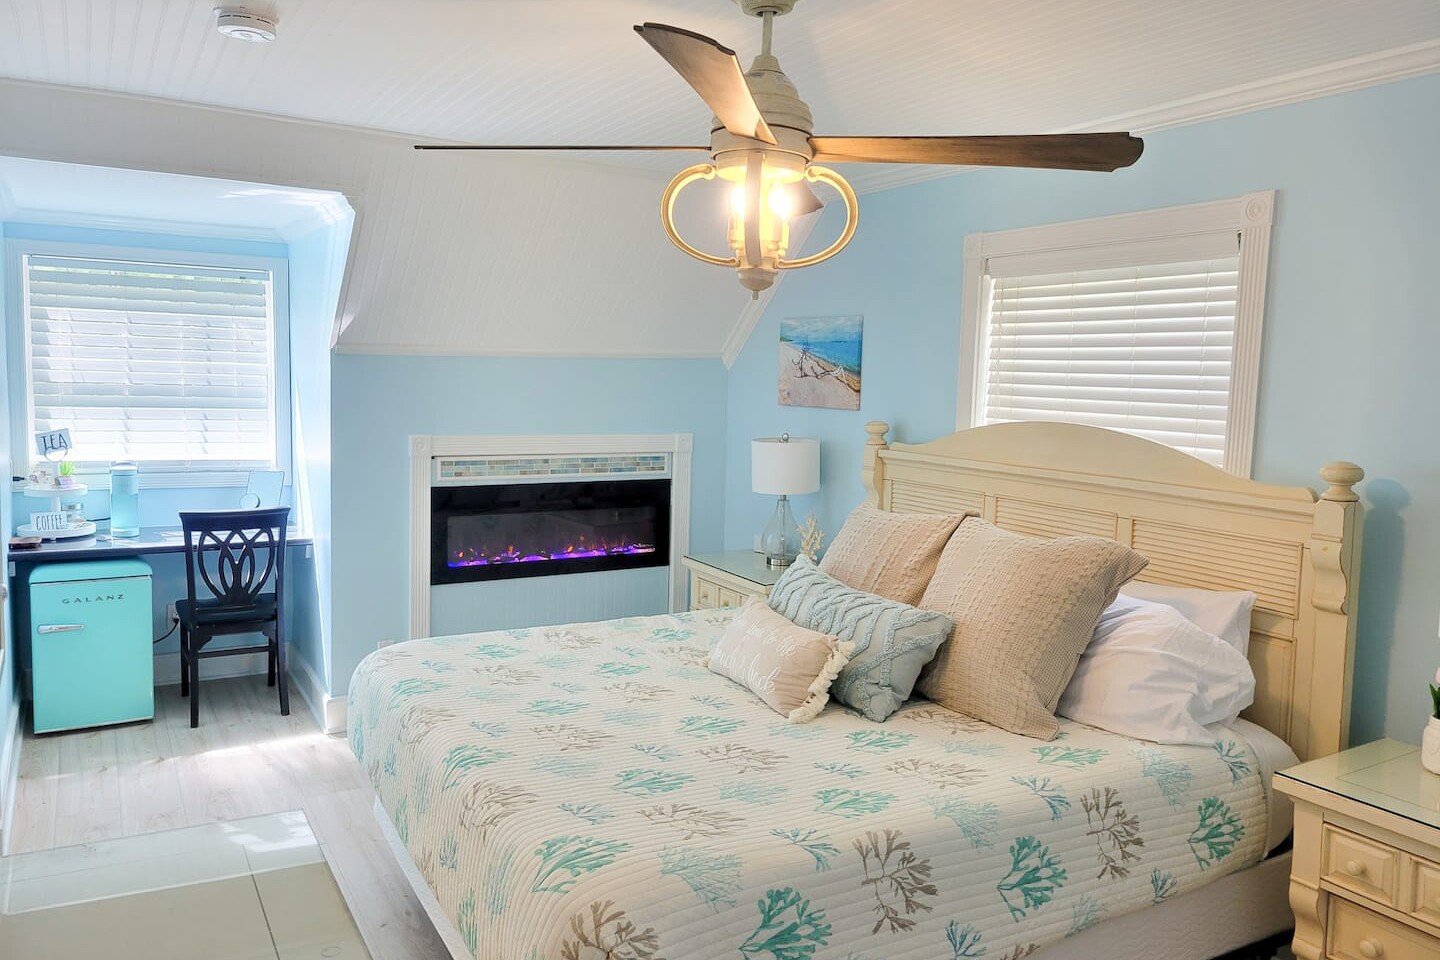 Key West bedroom with coral-print bedding